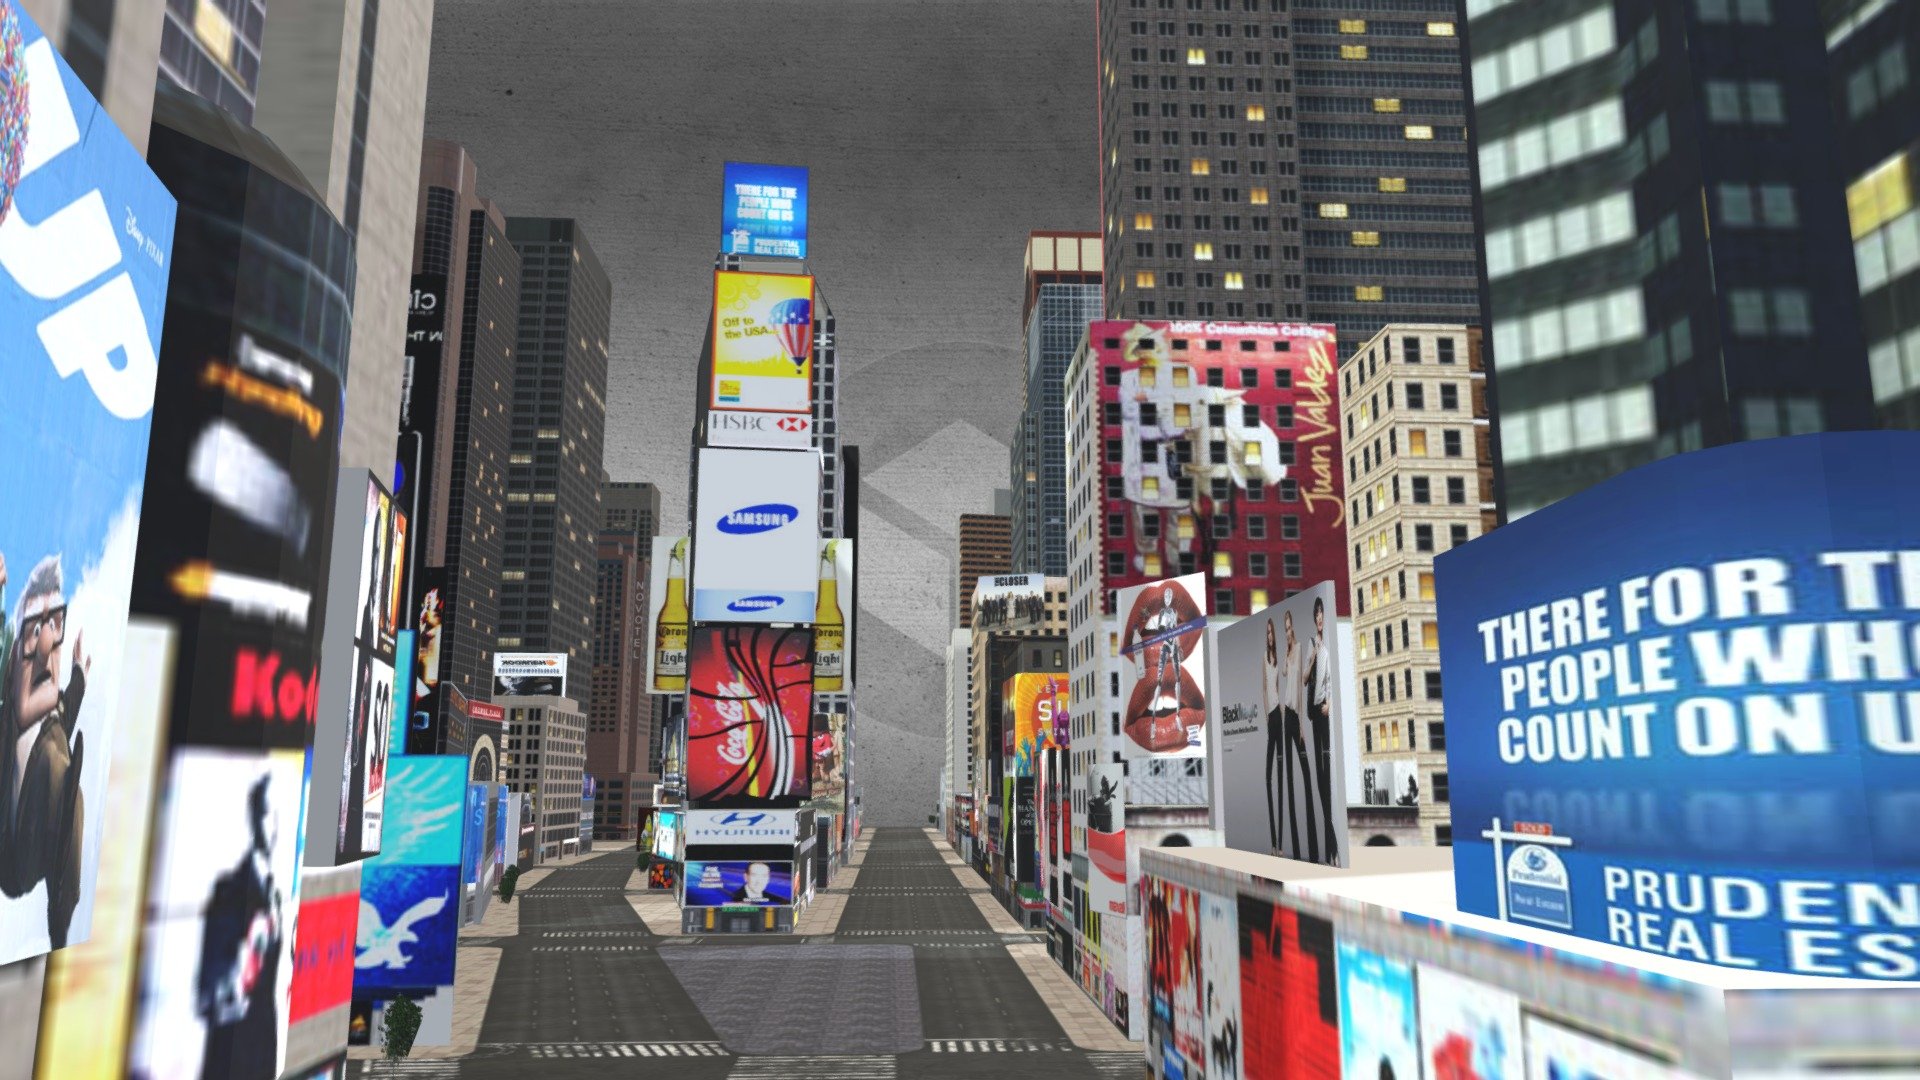 New York Low Poly Building 
Originally created with 3ds Max 2015and rendered in mental ray

Poly Count = 3169 
Vertex Count = 5444

Please Visit:
https://nuralam3d.blogspot.com/2021/12/new-york-city-low-poly.html - New York Low Poly Building - 3D model by nuralam018 3d model